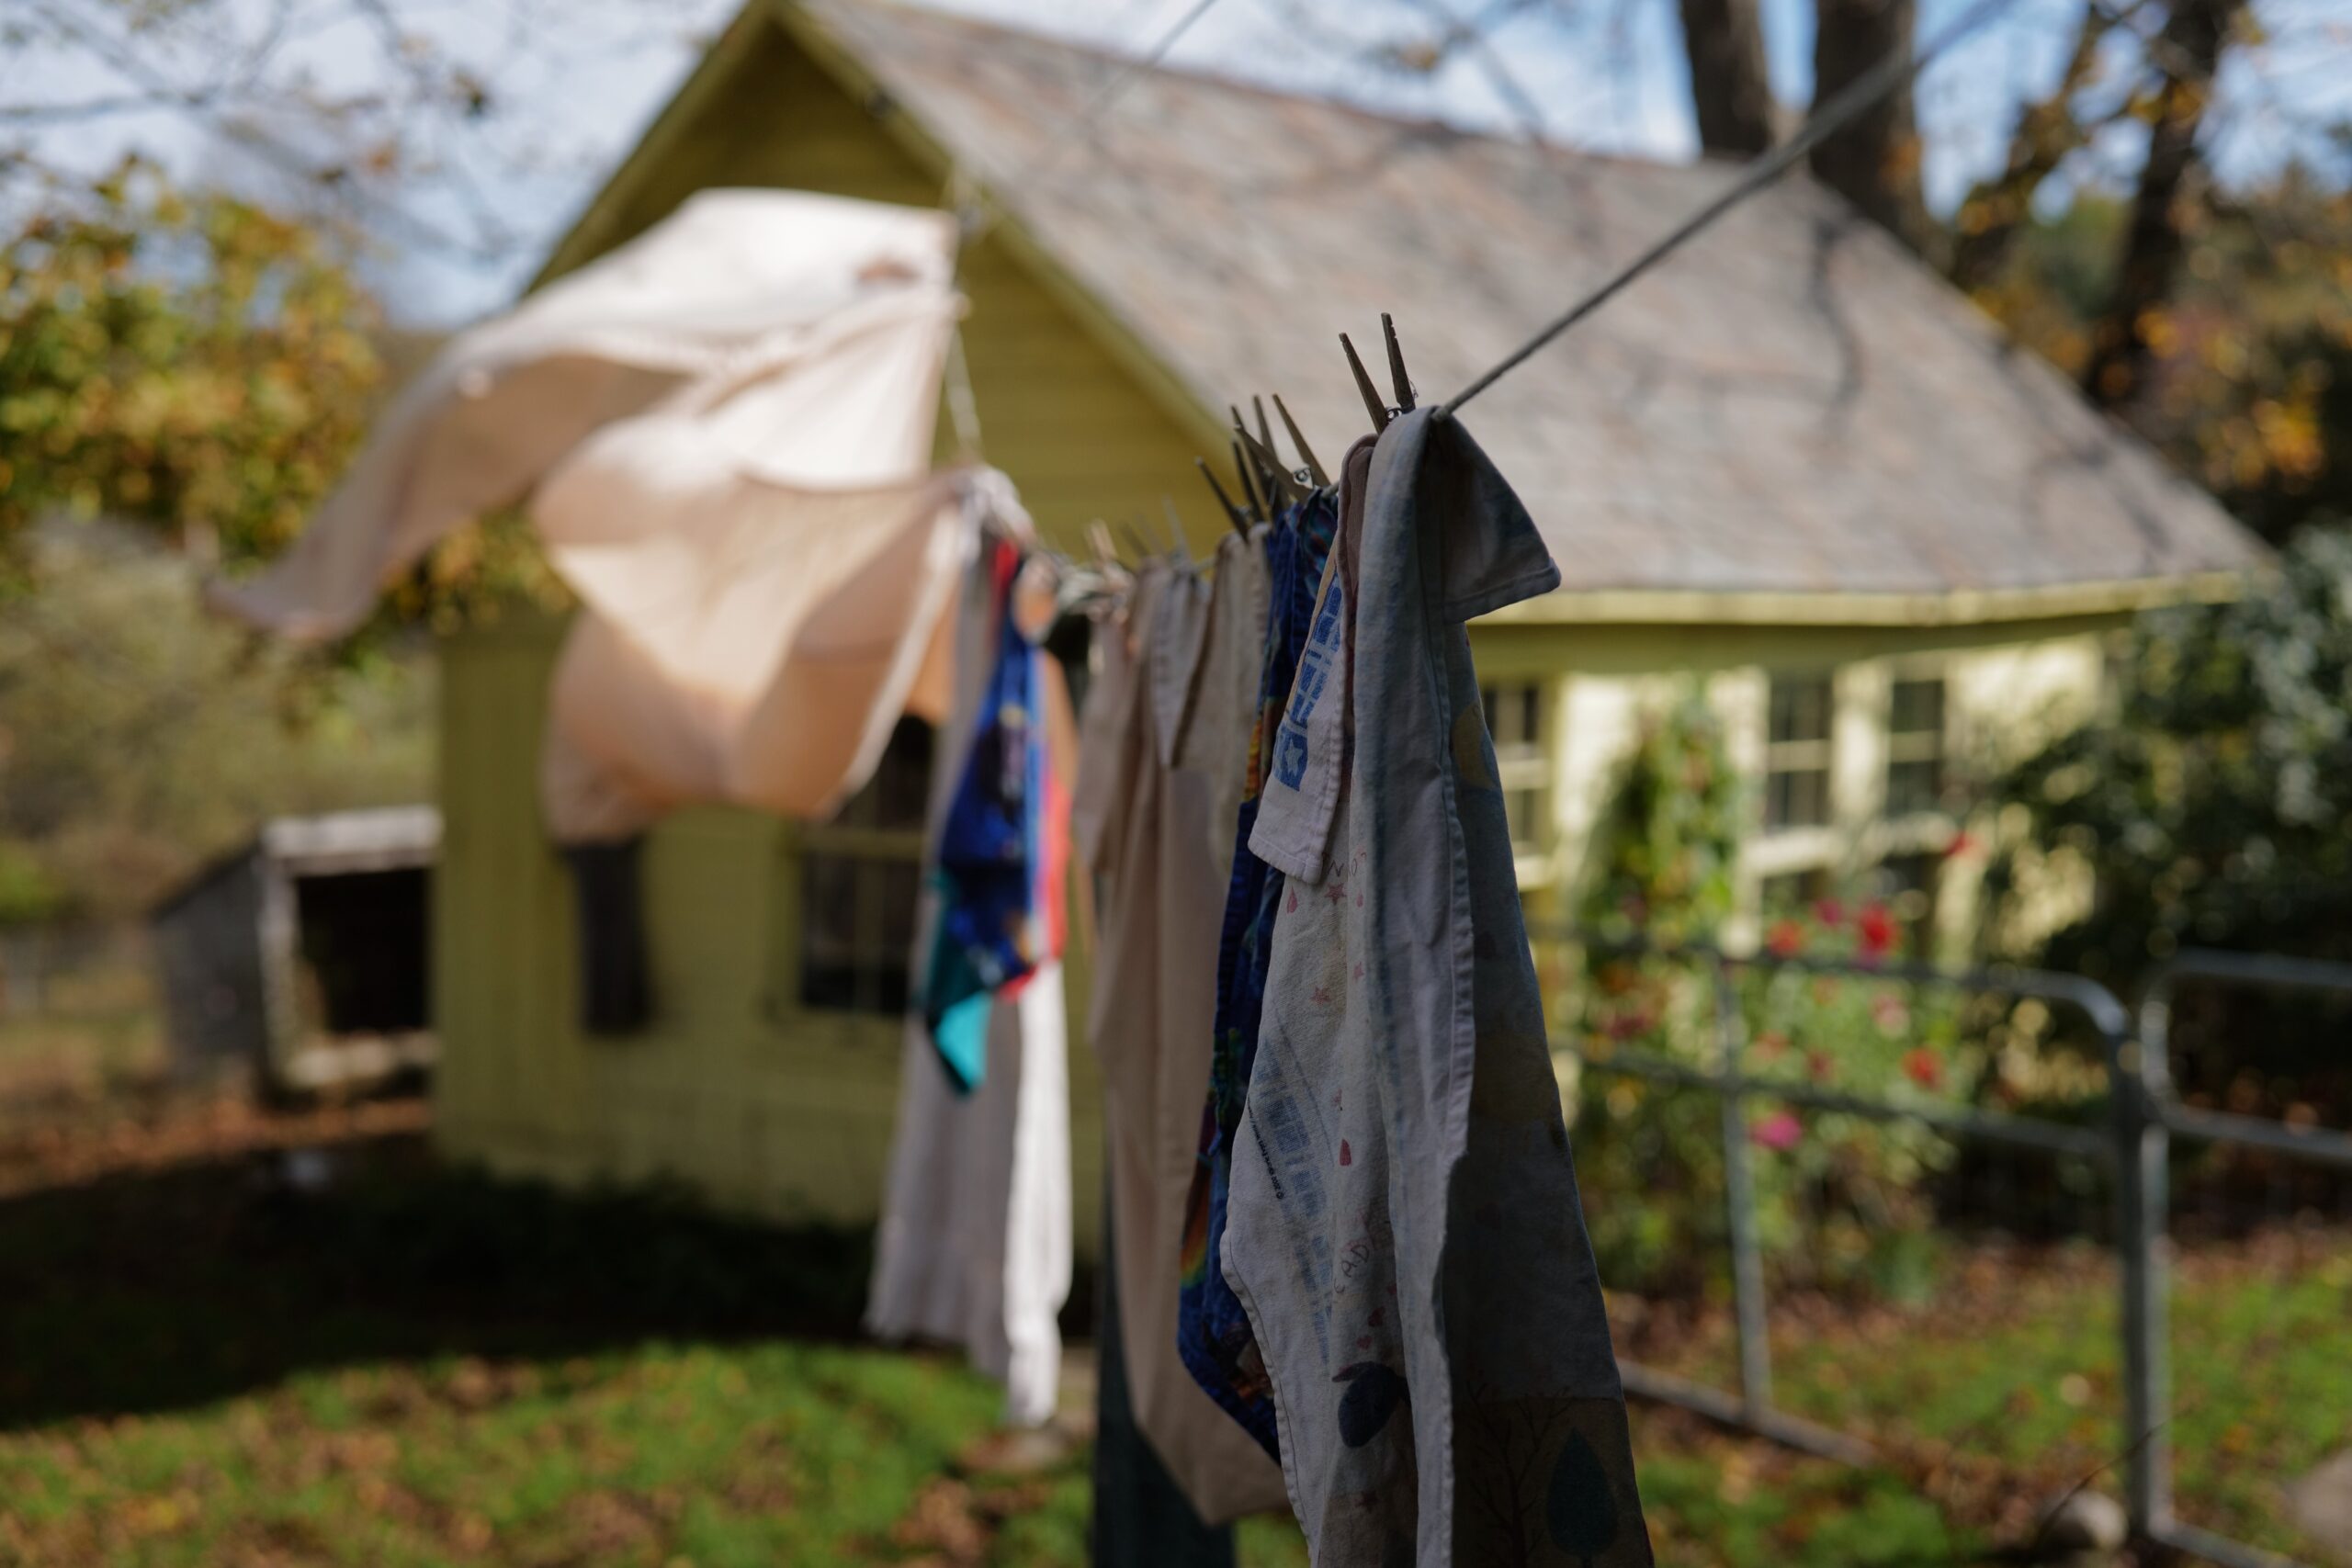 Hail The Humble Clothesline. One Of My Favorite Weekly Photographs